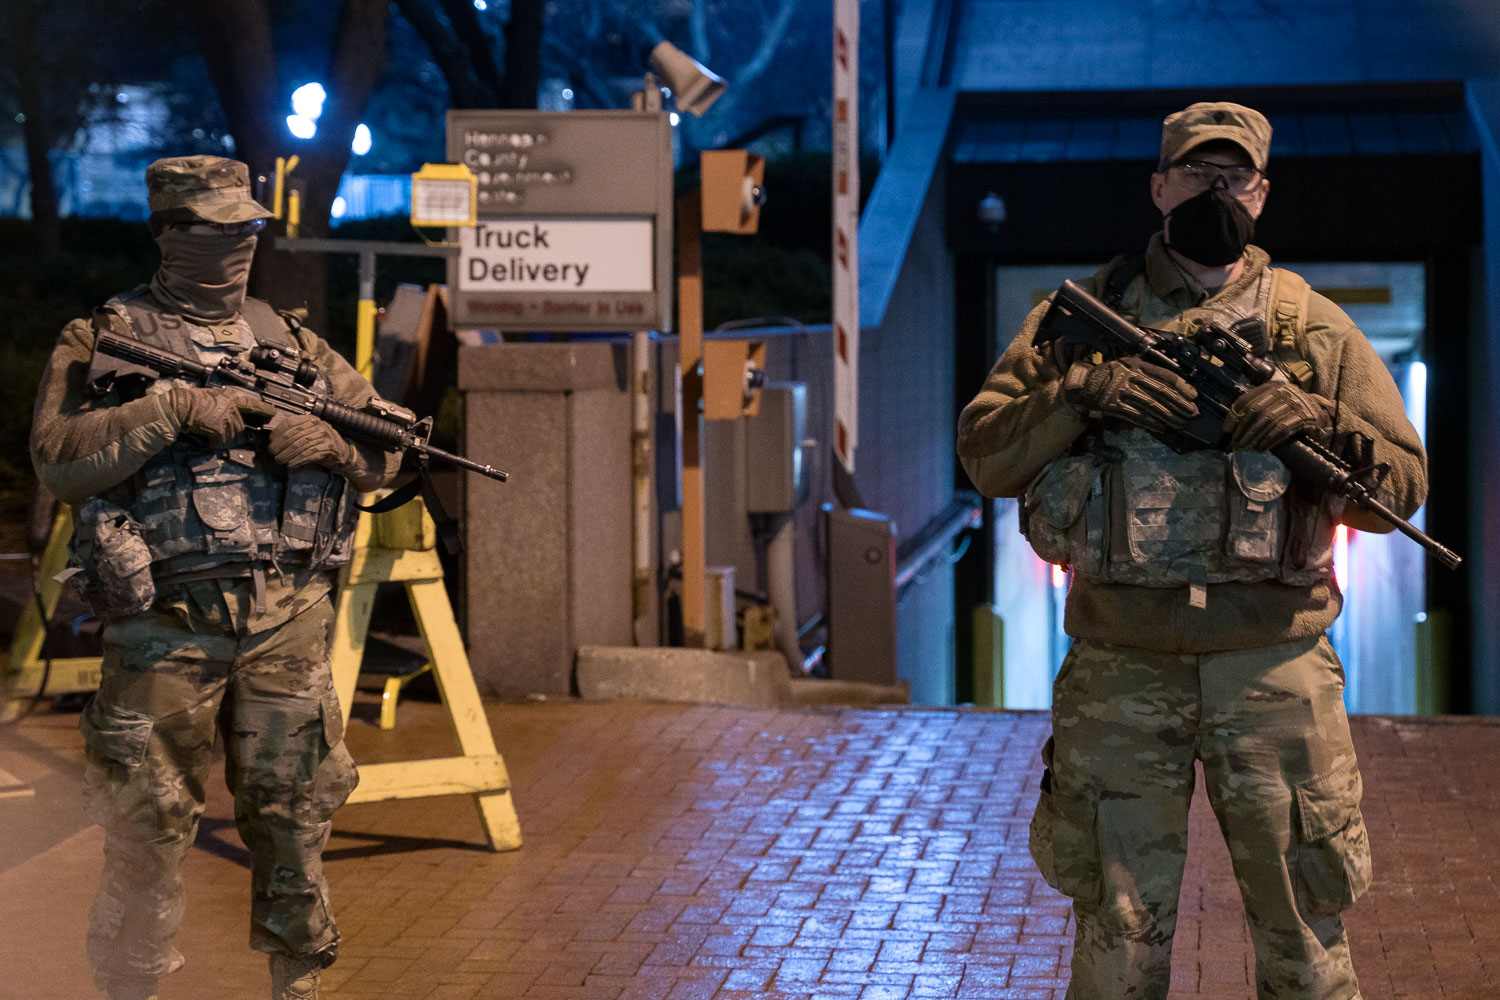 The Minnesota National guard outside the Hennepin County Government Center in Minneapolis on March 7th, 2021 during the Derek Chauvin murder trial.